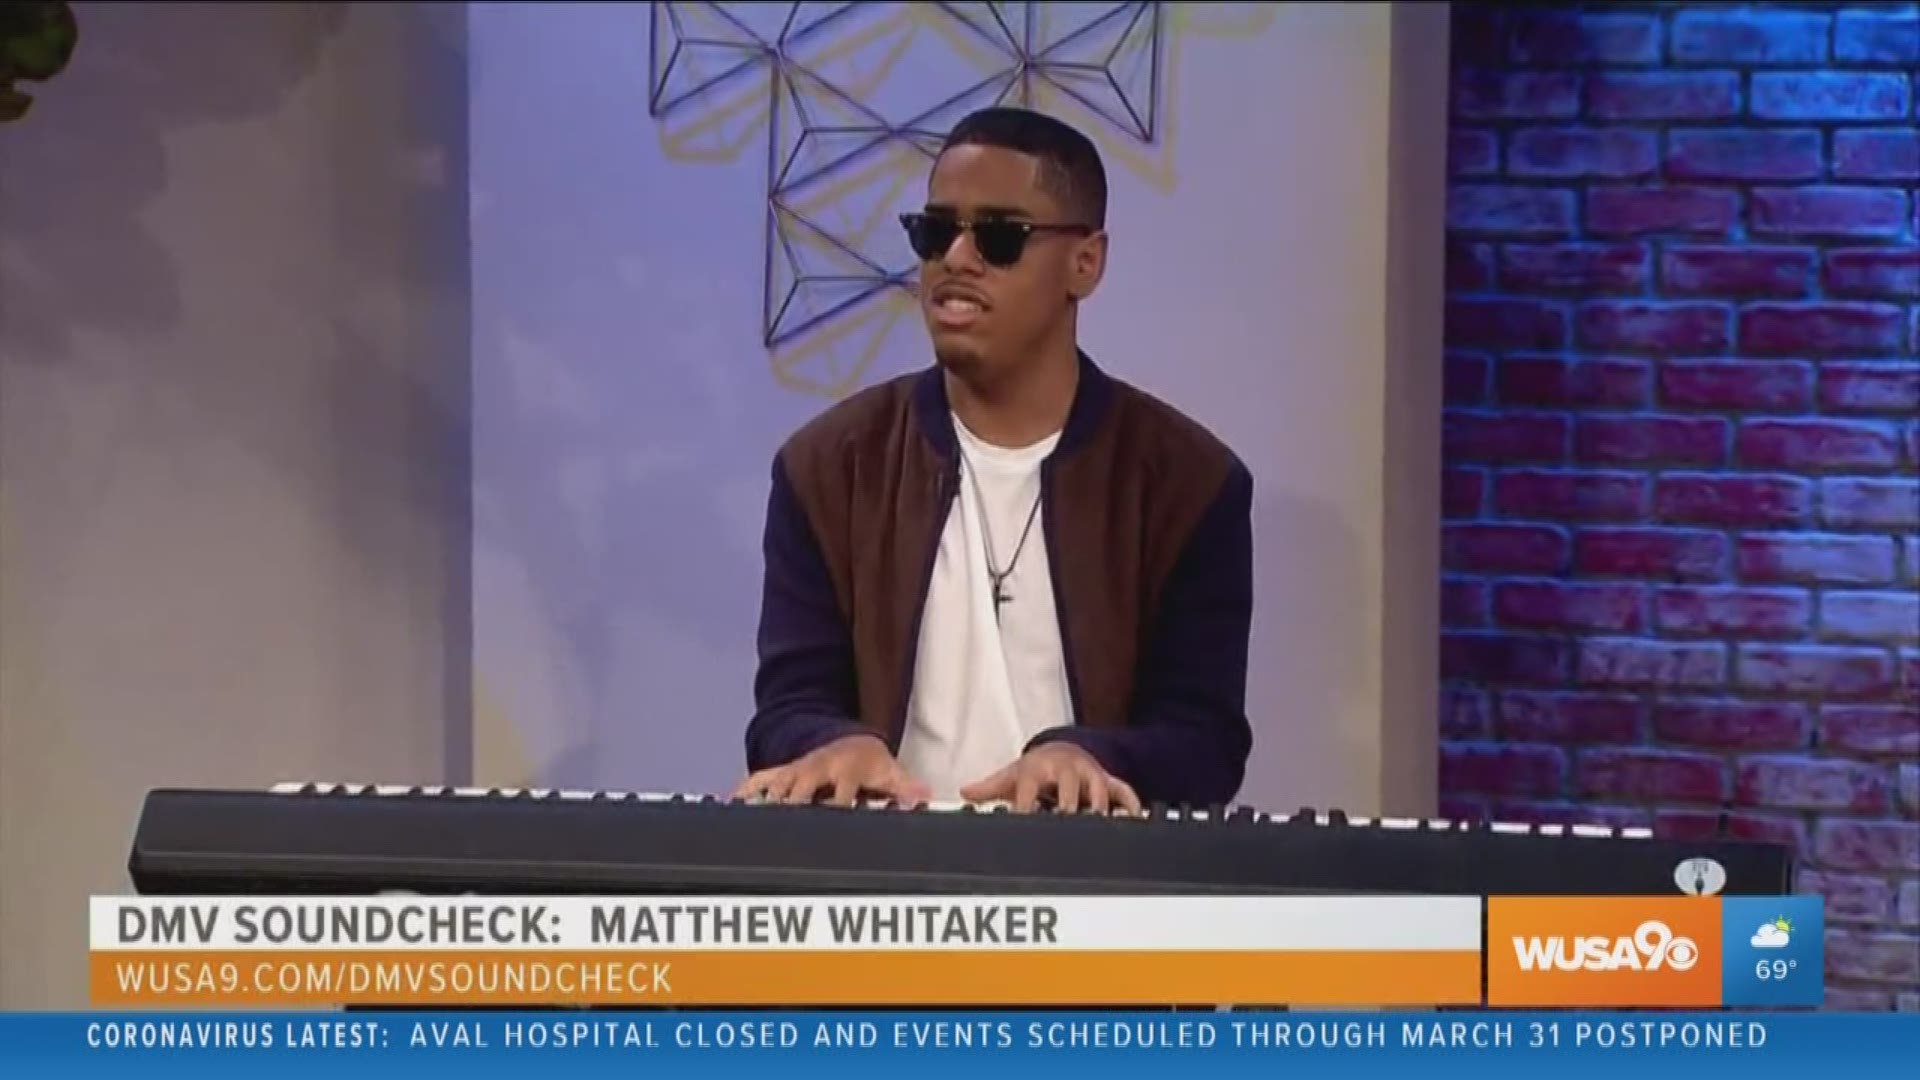 We update legally blind pianist Matthew Whitaker's story in the DMV Soundcheck. Sponsored by DC OCTFME to Send a sample of your work to dmvsoundcheck@wusa9.com.